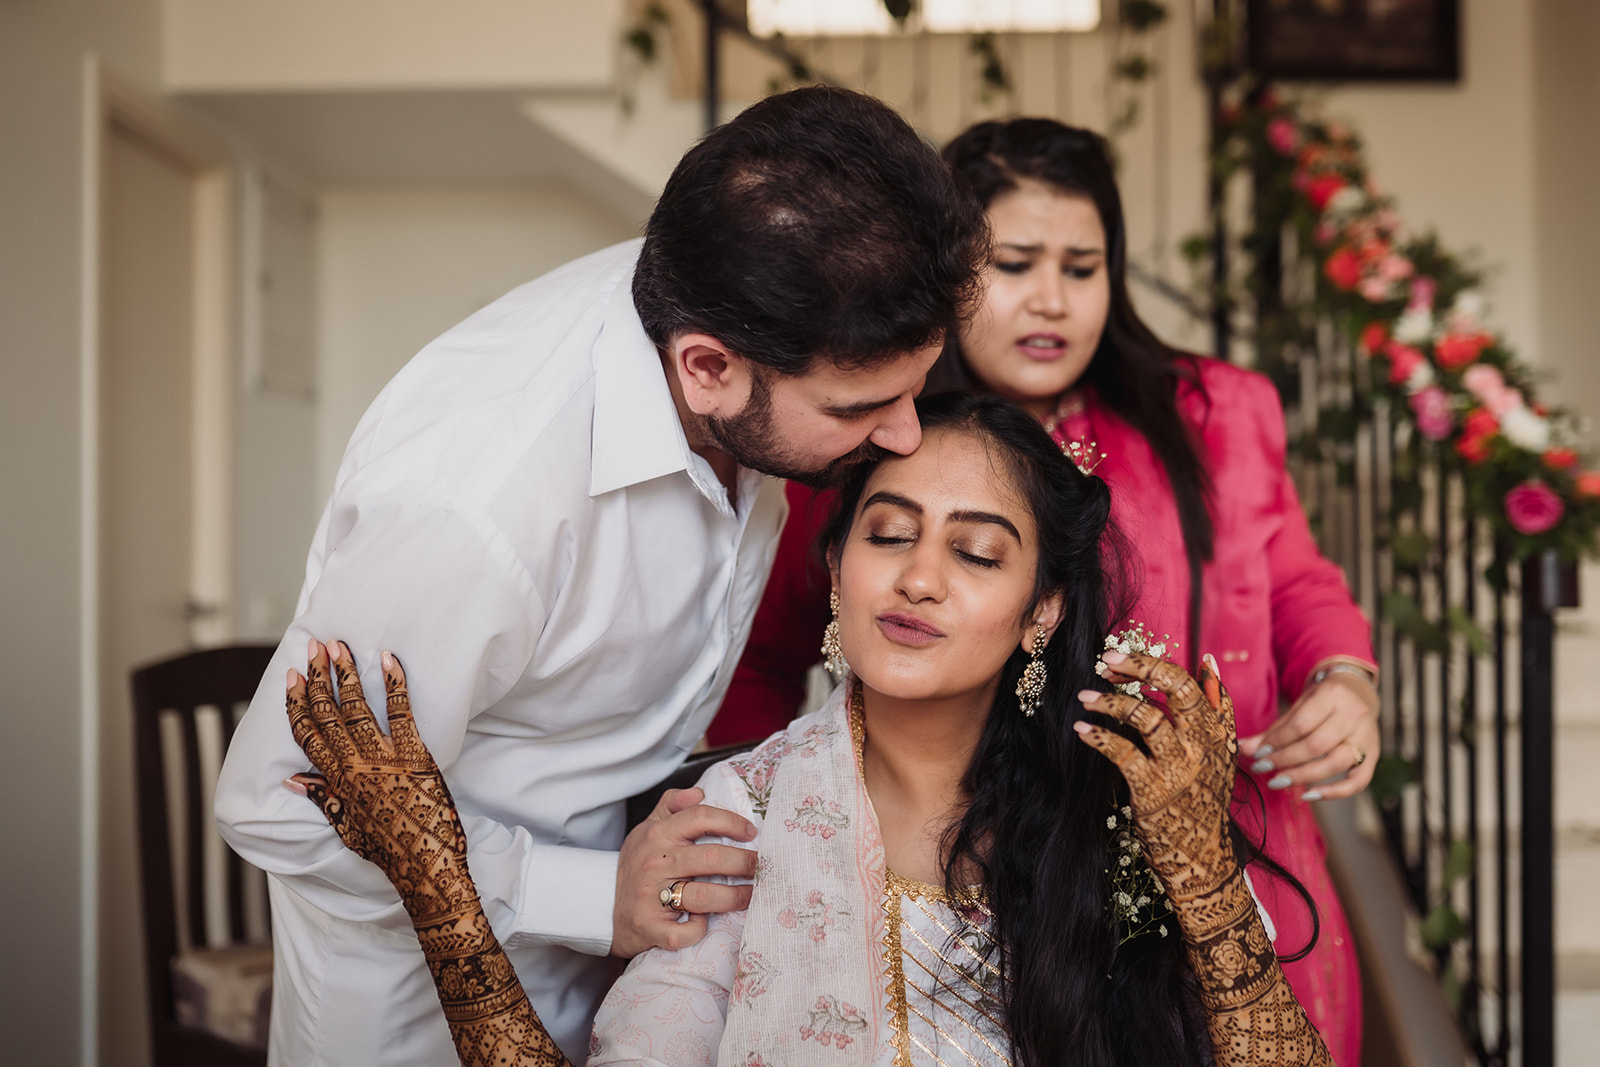 Family love in a frame: The bride shares a special selfie moment, surrounded by the warmth of her family